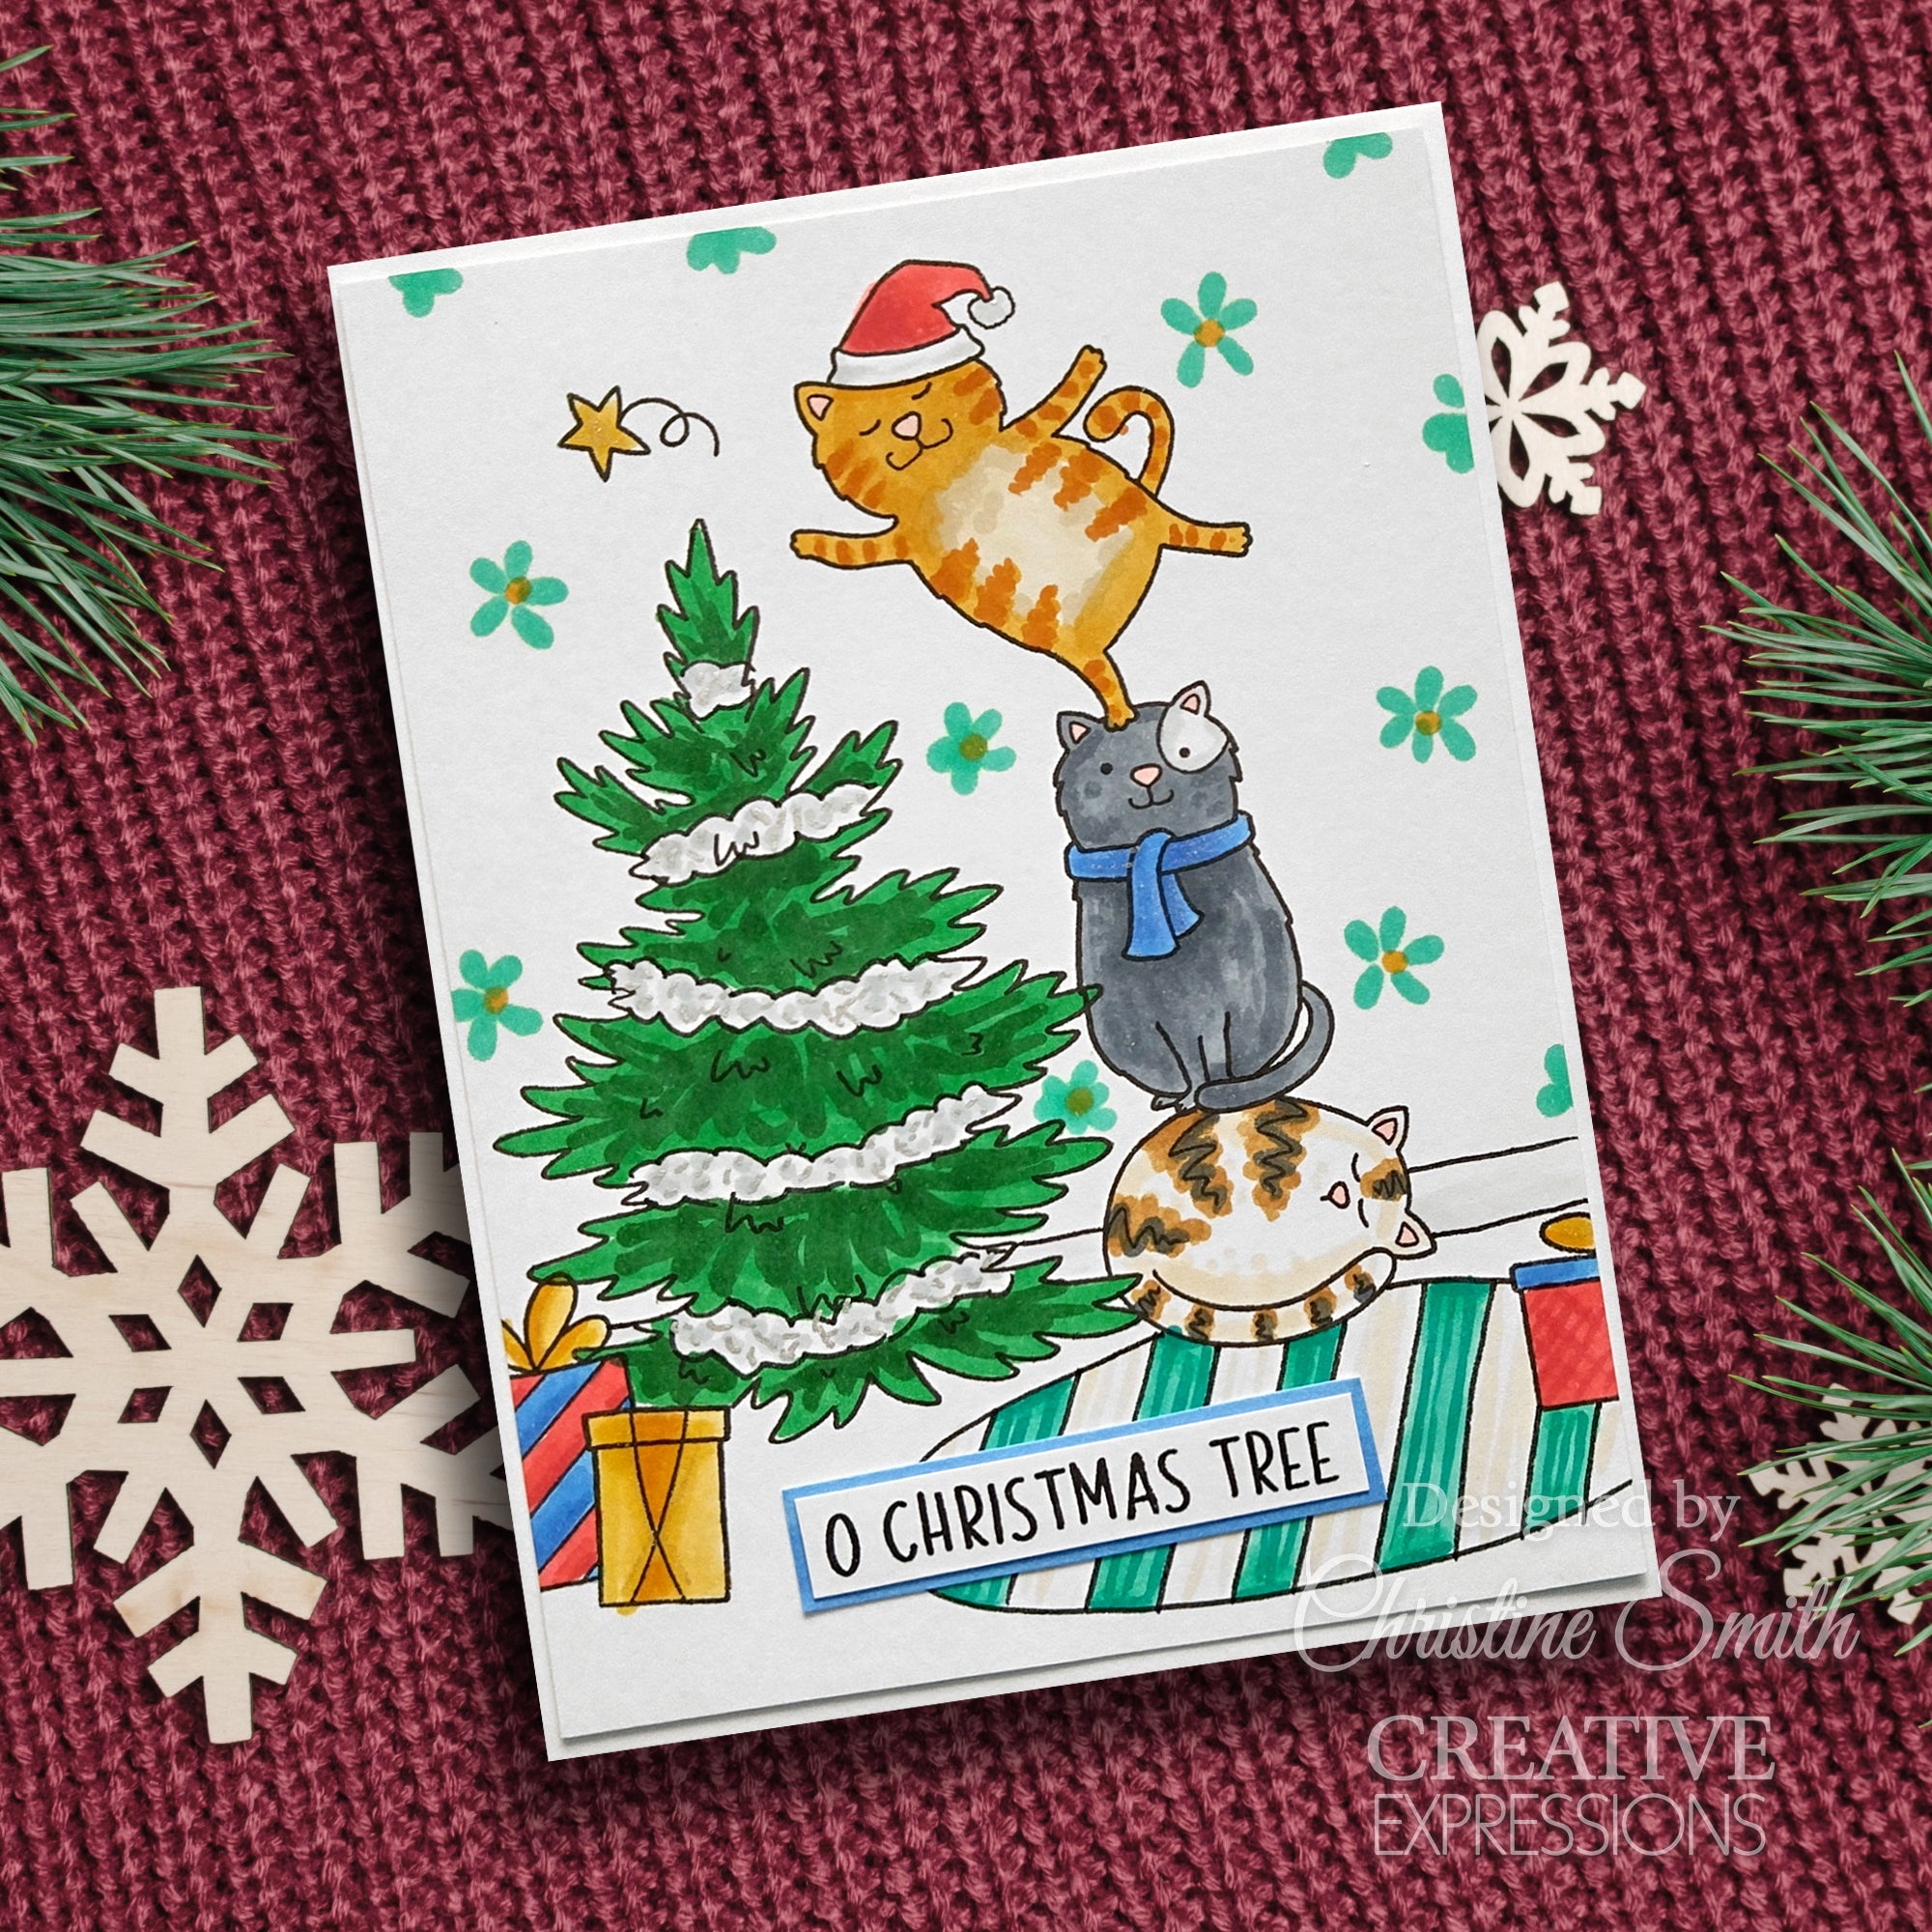 Creative Expressions Jane's Doodles O Christmas Tree 6 in x 8 in Clear Stamp Set